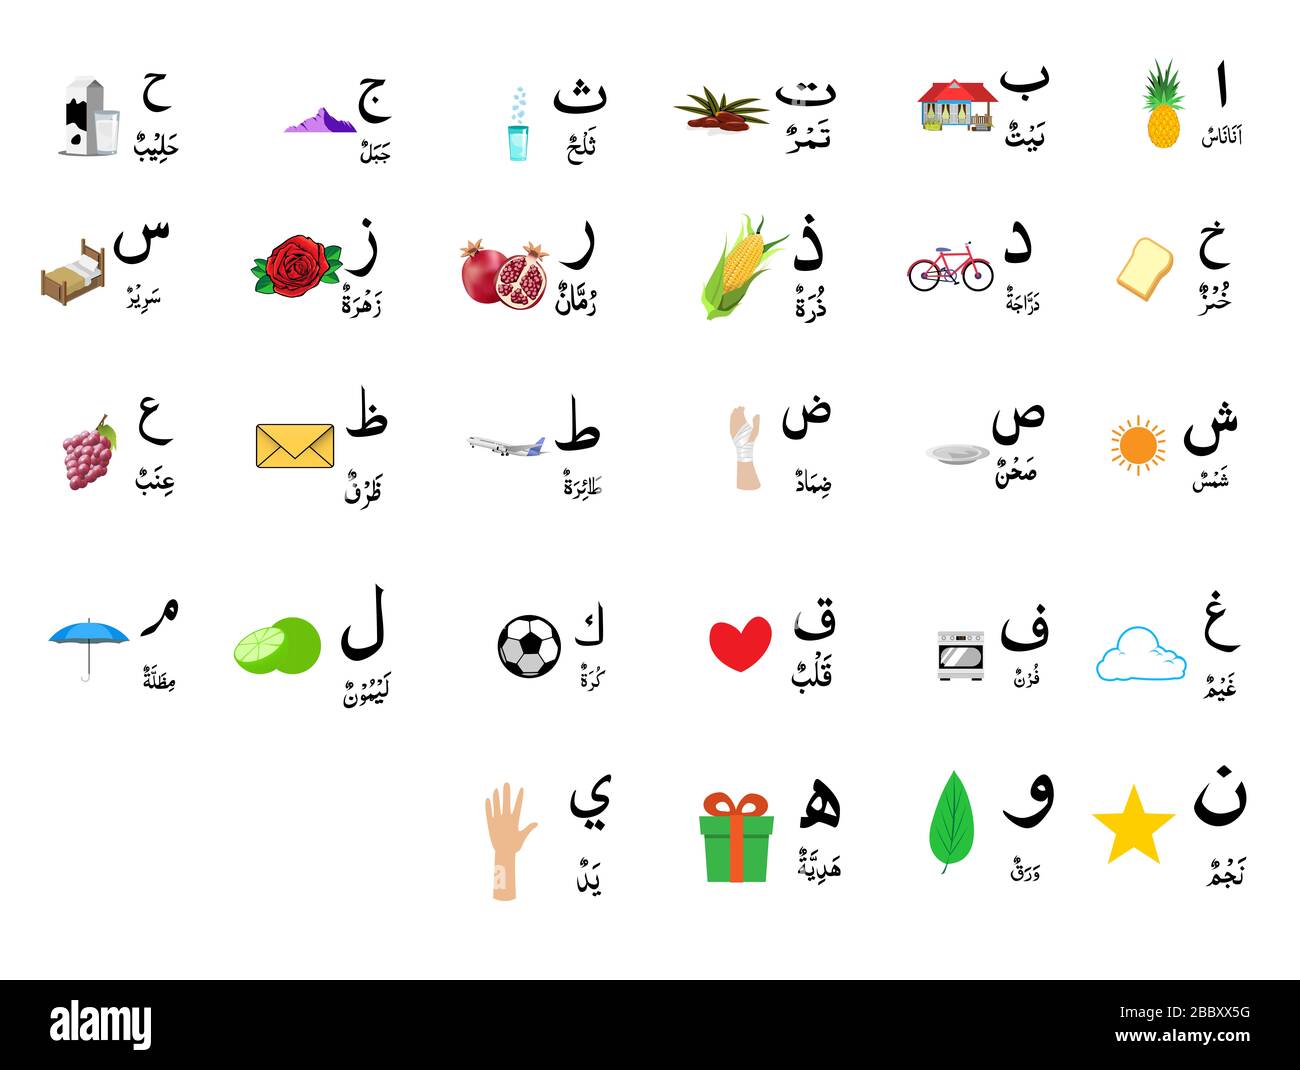 Arabic Alphabet Letters To English